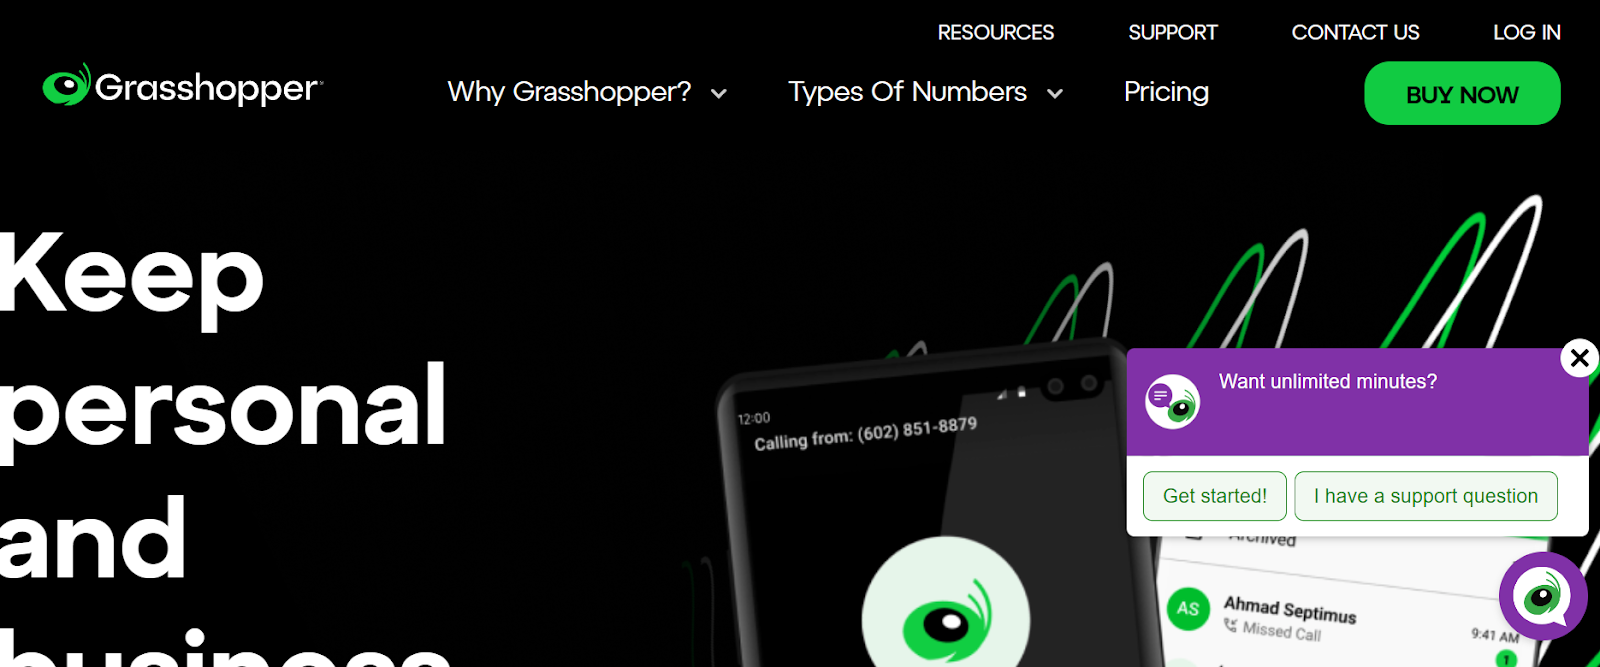 Grasshopper website snapshot highlighting the services it offers.